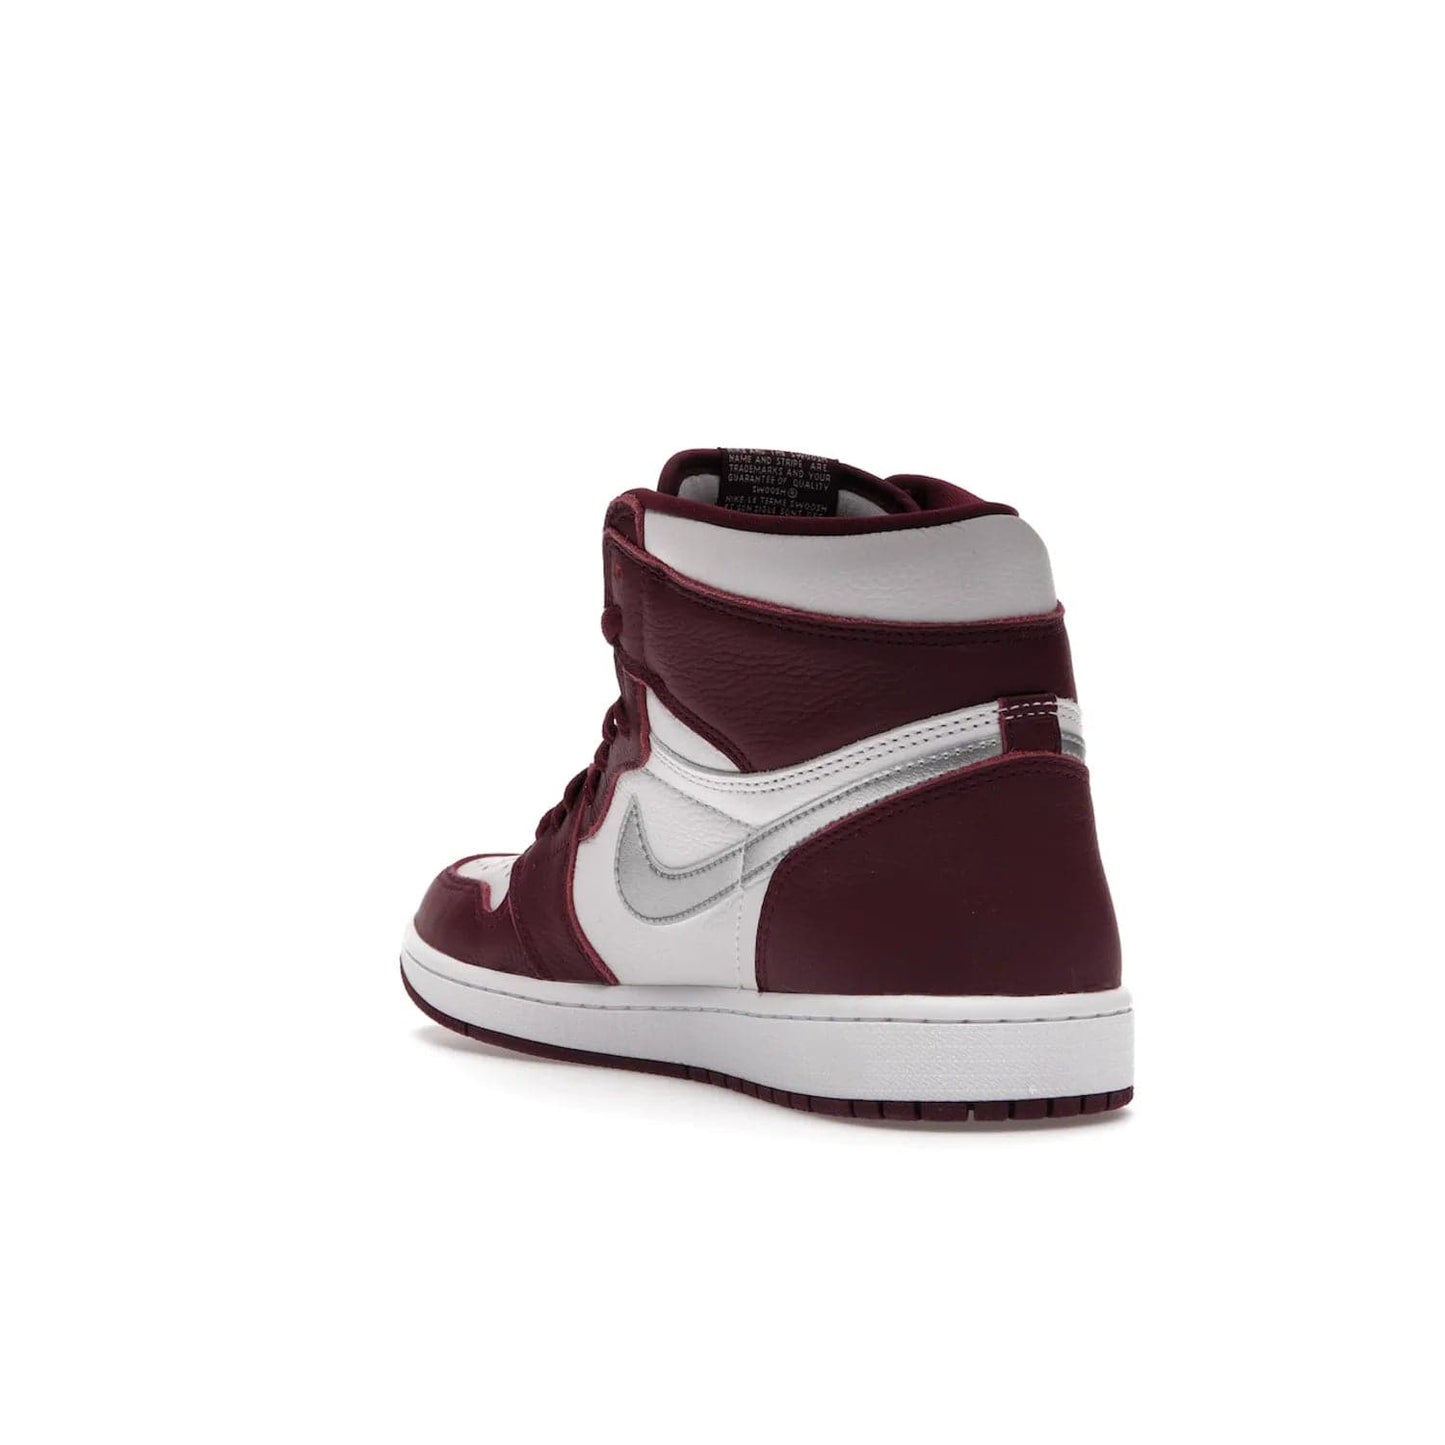 Jordan 1 Retro High OG Bordeaux - Image 25 - Only at www.BallersClubKickz.com - Shop the classic Air Jordan 1 High Bordeaux with a modern high-top cut. The timeless Bordeaux and White-Metallic Silver colorway, releasing Nov 20, 2021, is perfect for practice or a night out.